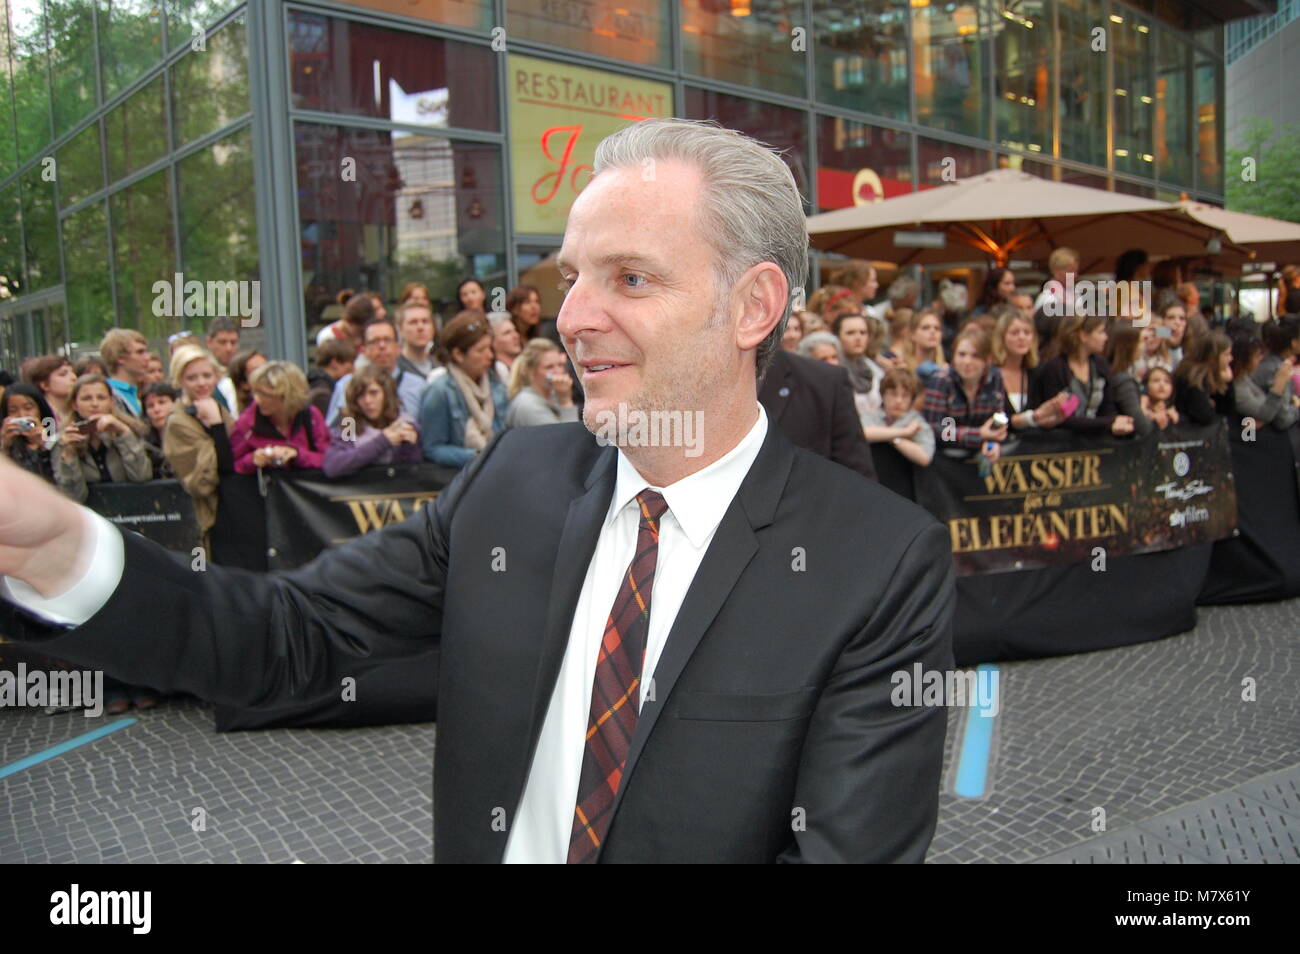 Director Francis Lawrence attends the 'Wasser fuer die Elefanten' Germany premiere at CineStar on April 27, 2010 in Berlin, Germany Stock Photo